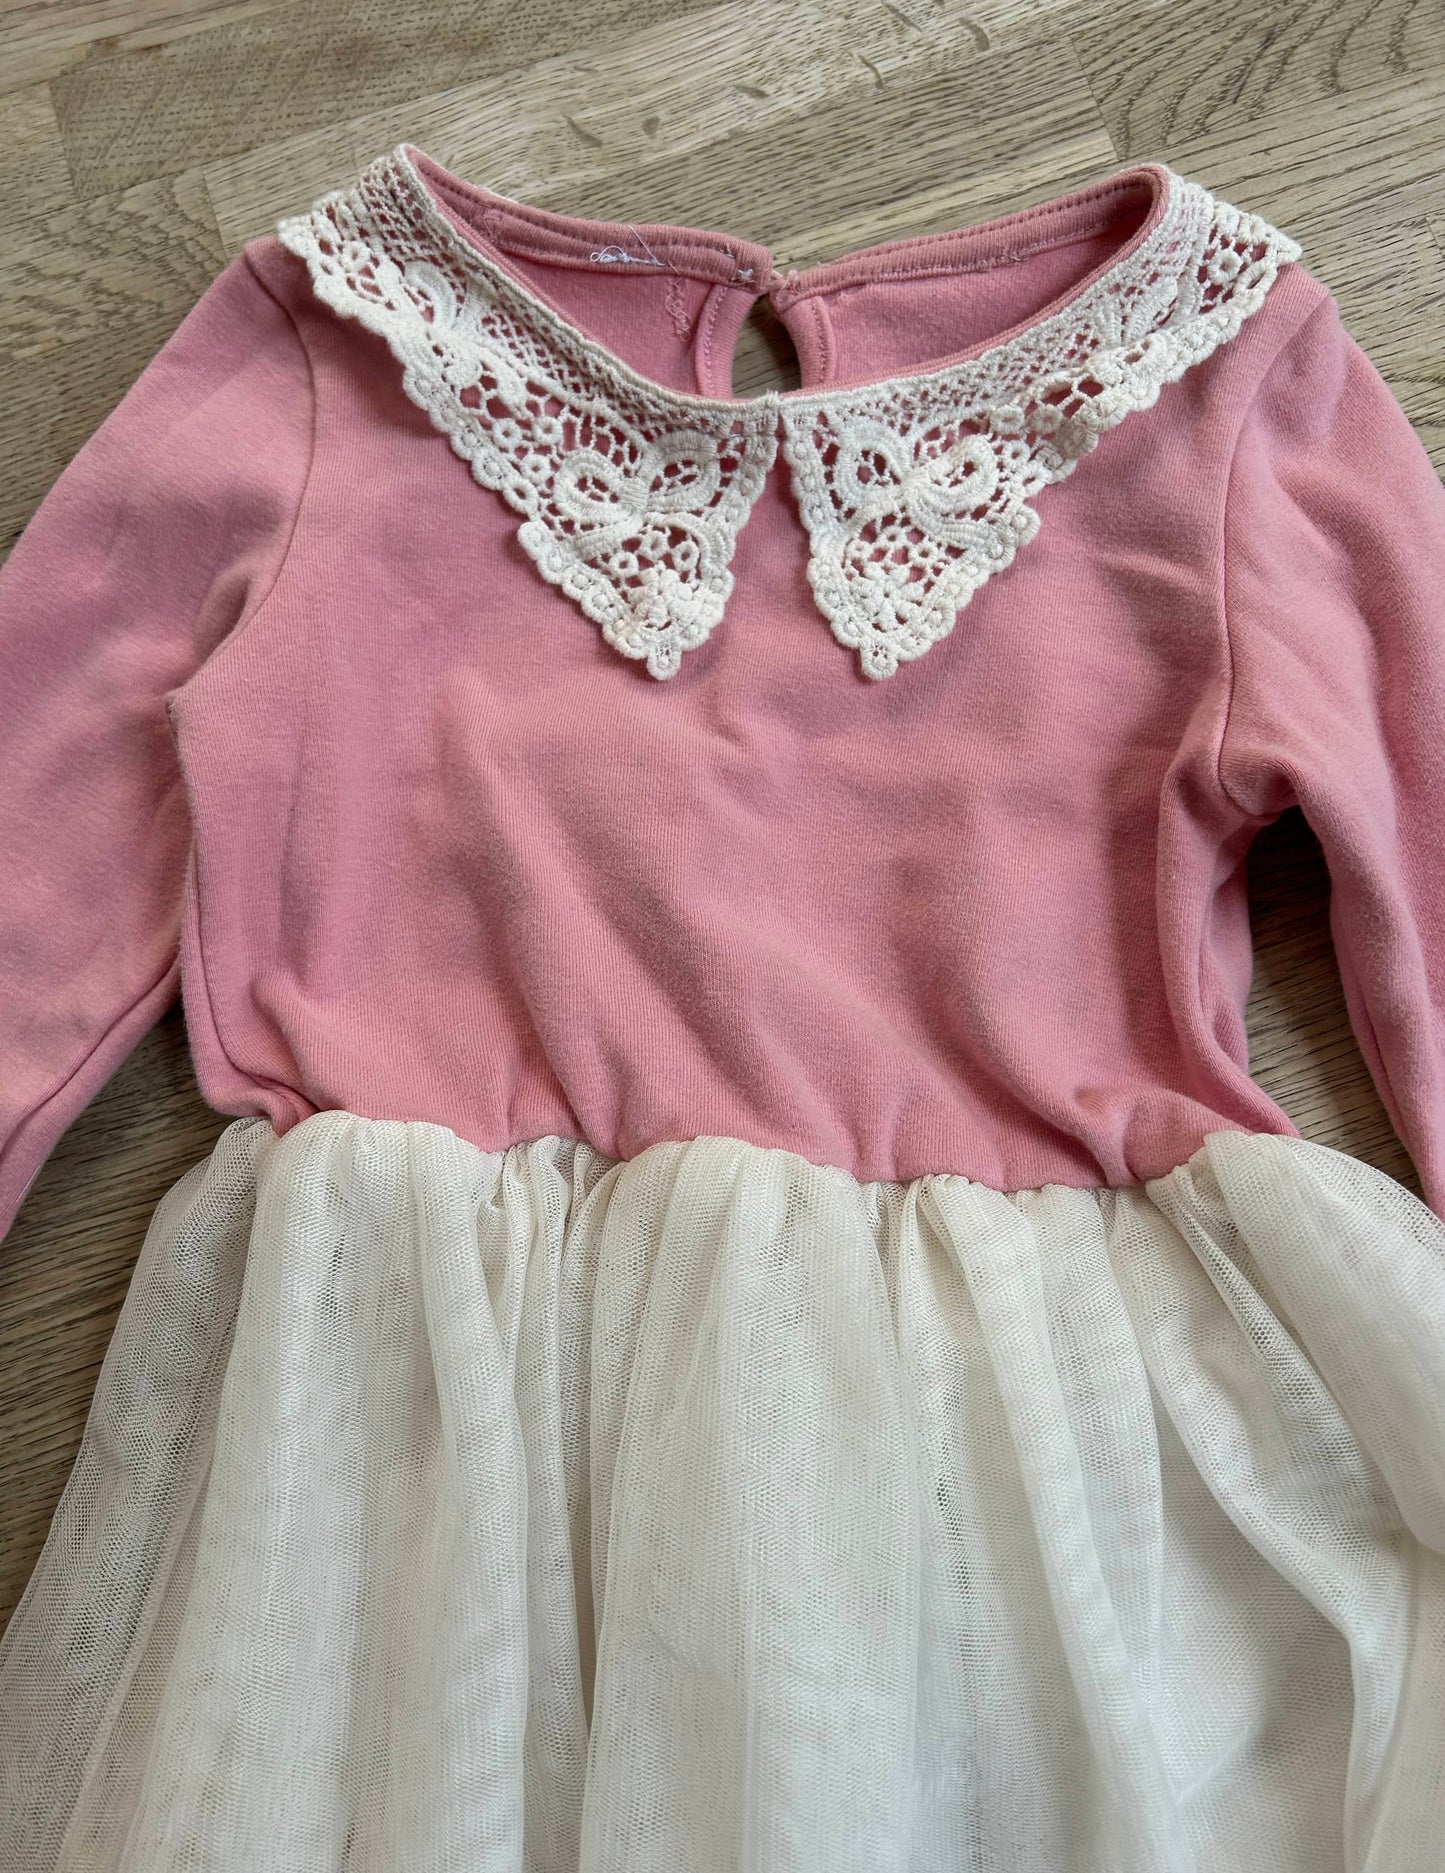 Pink Collared Dress (Pre-Loved) Size 4/5t (Repair Shop)